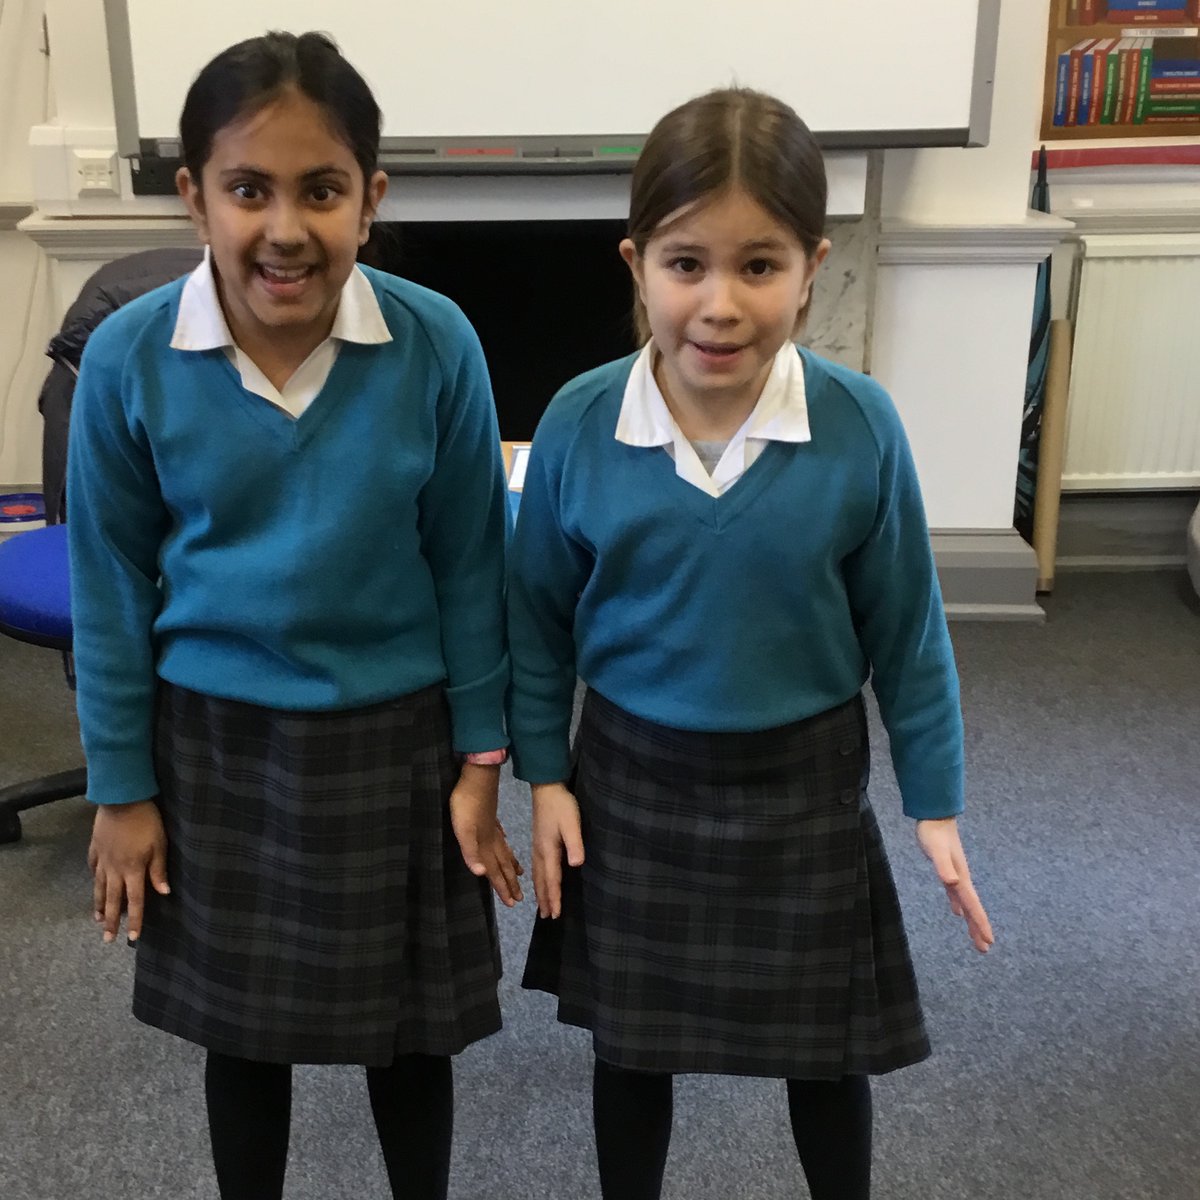 Fabulous facial expression shown while practising for the Bedfordshire Festival before half term - we cannot wait to see the the student’ performances #BGSYear5 #BGSCreative